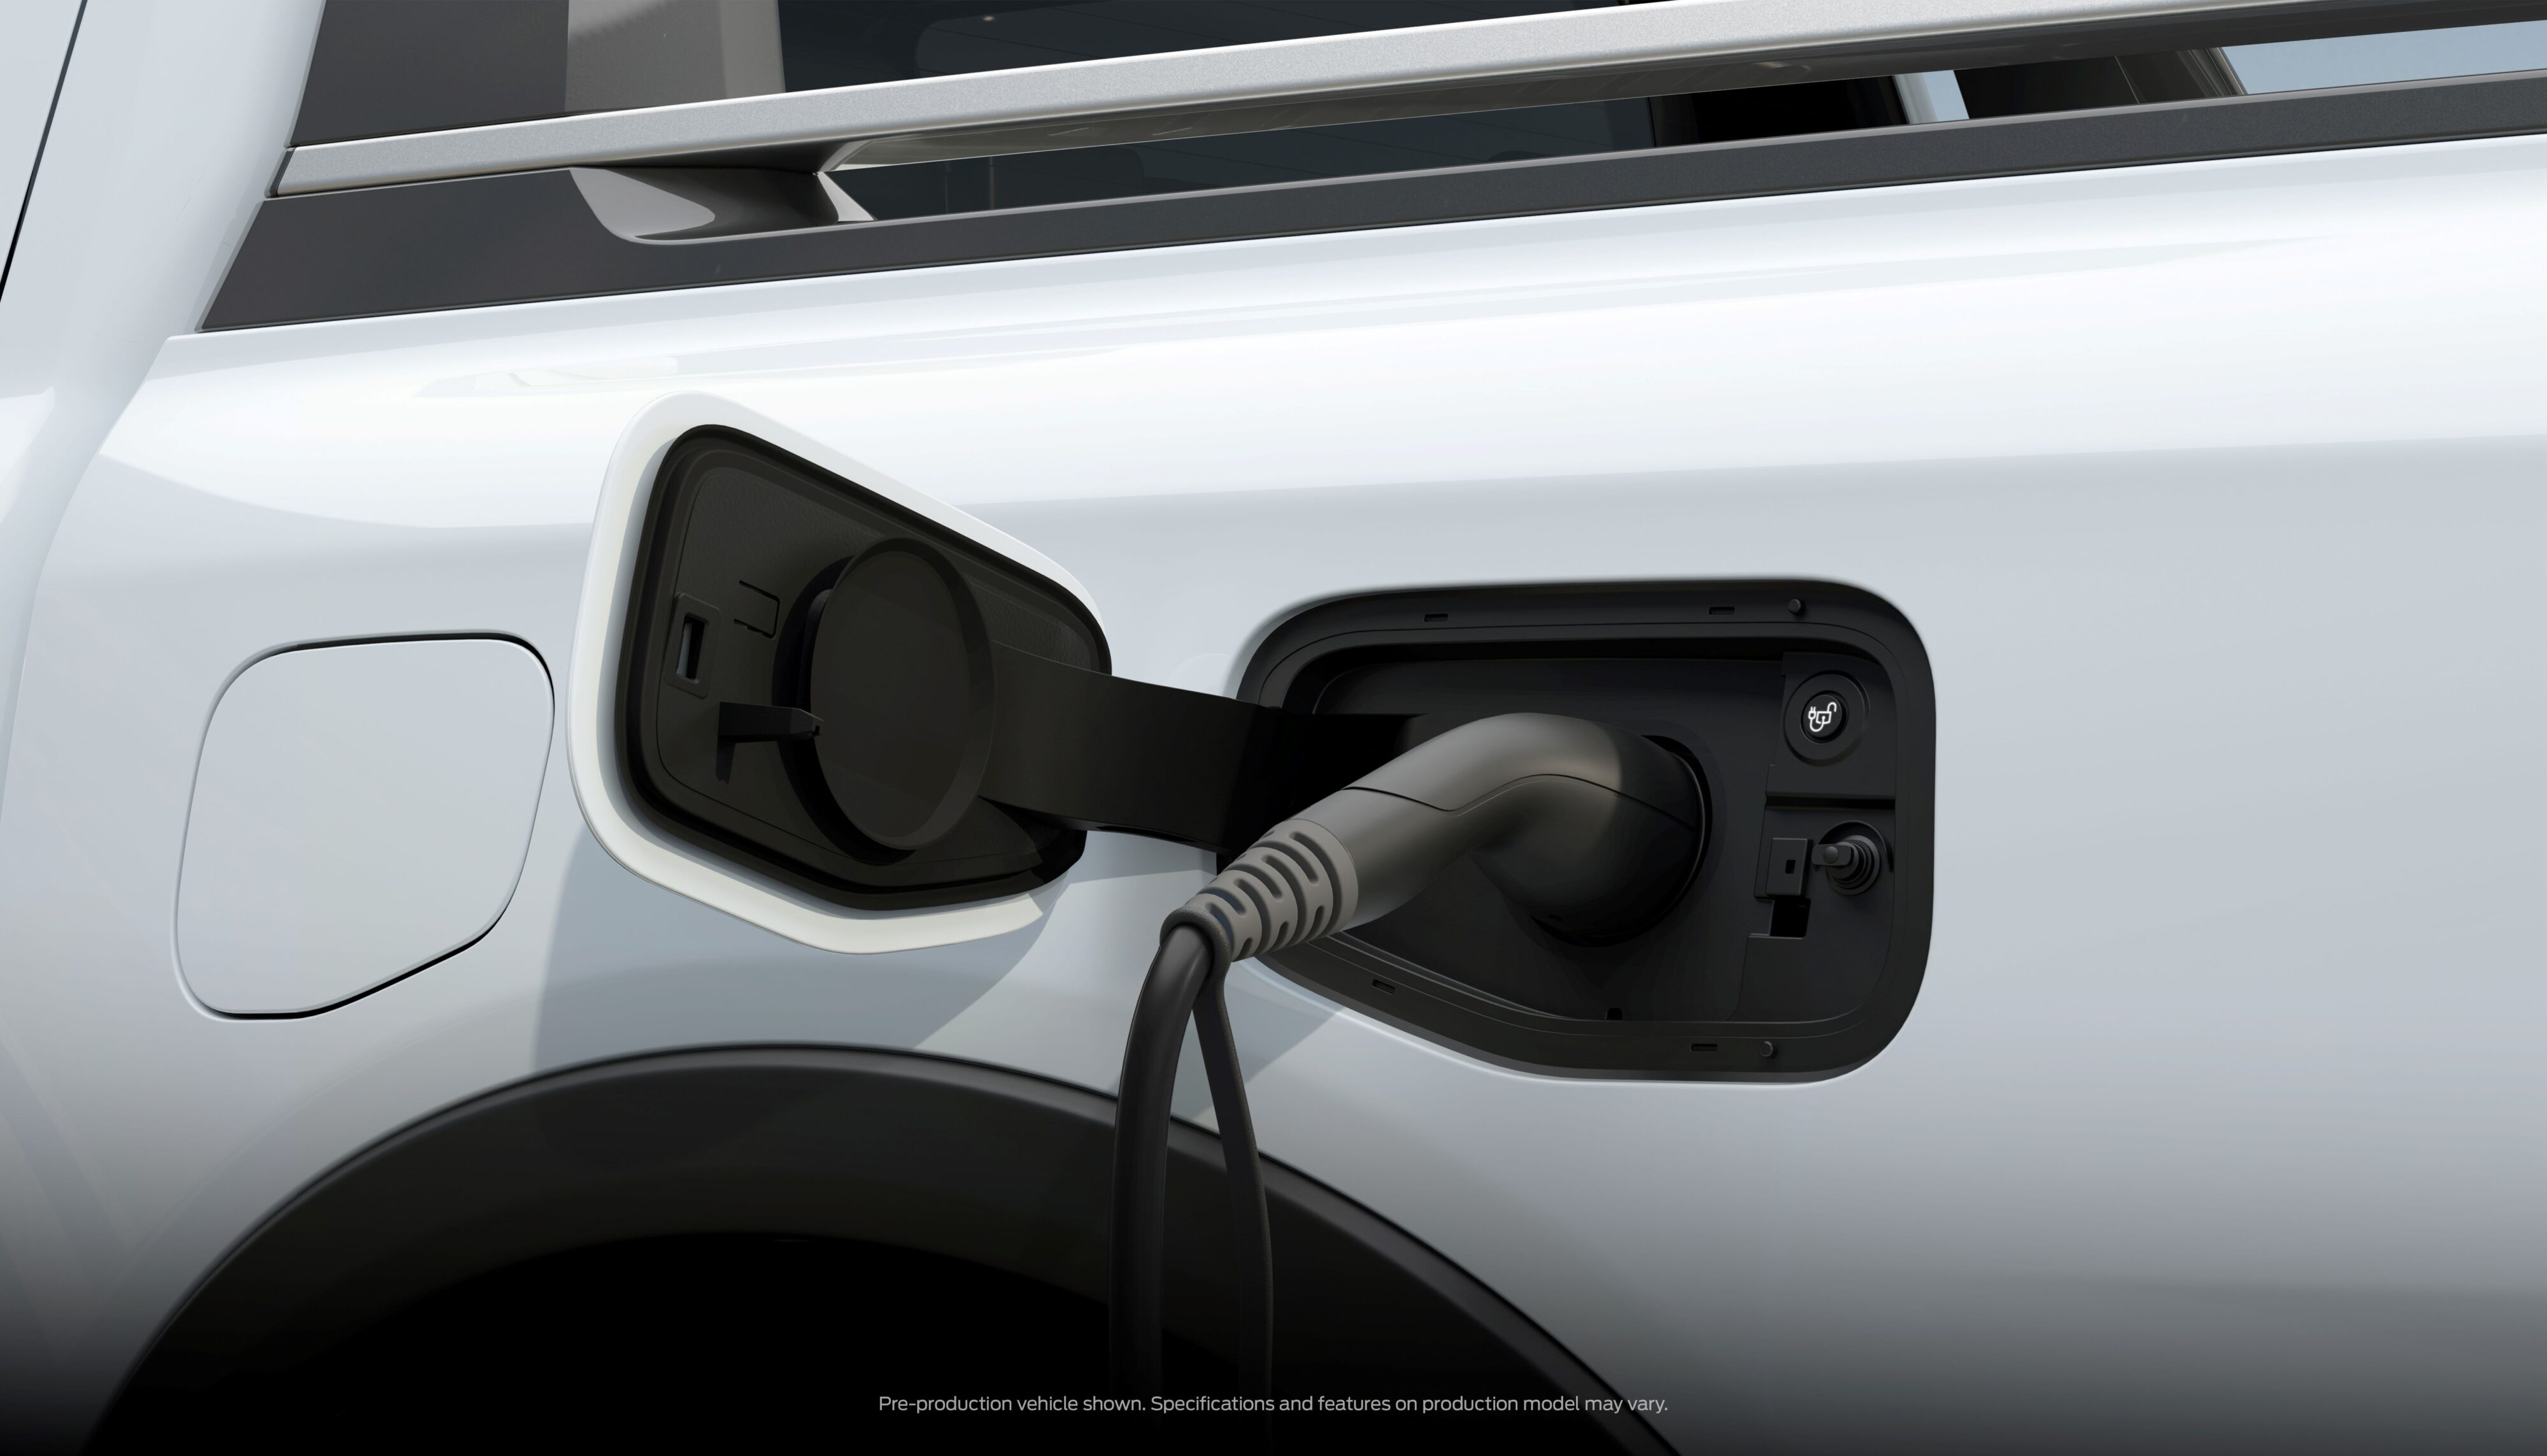 Close-up view of the charging port on a 2023 Ford Ranger PHEV.